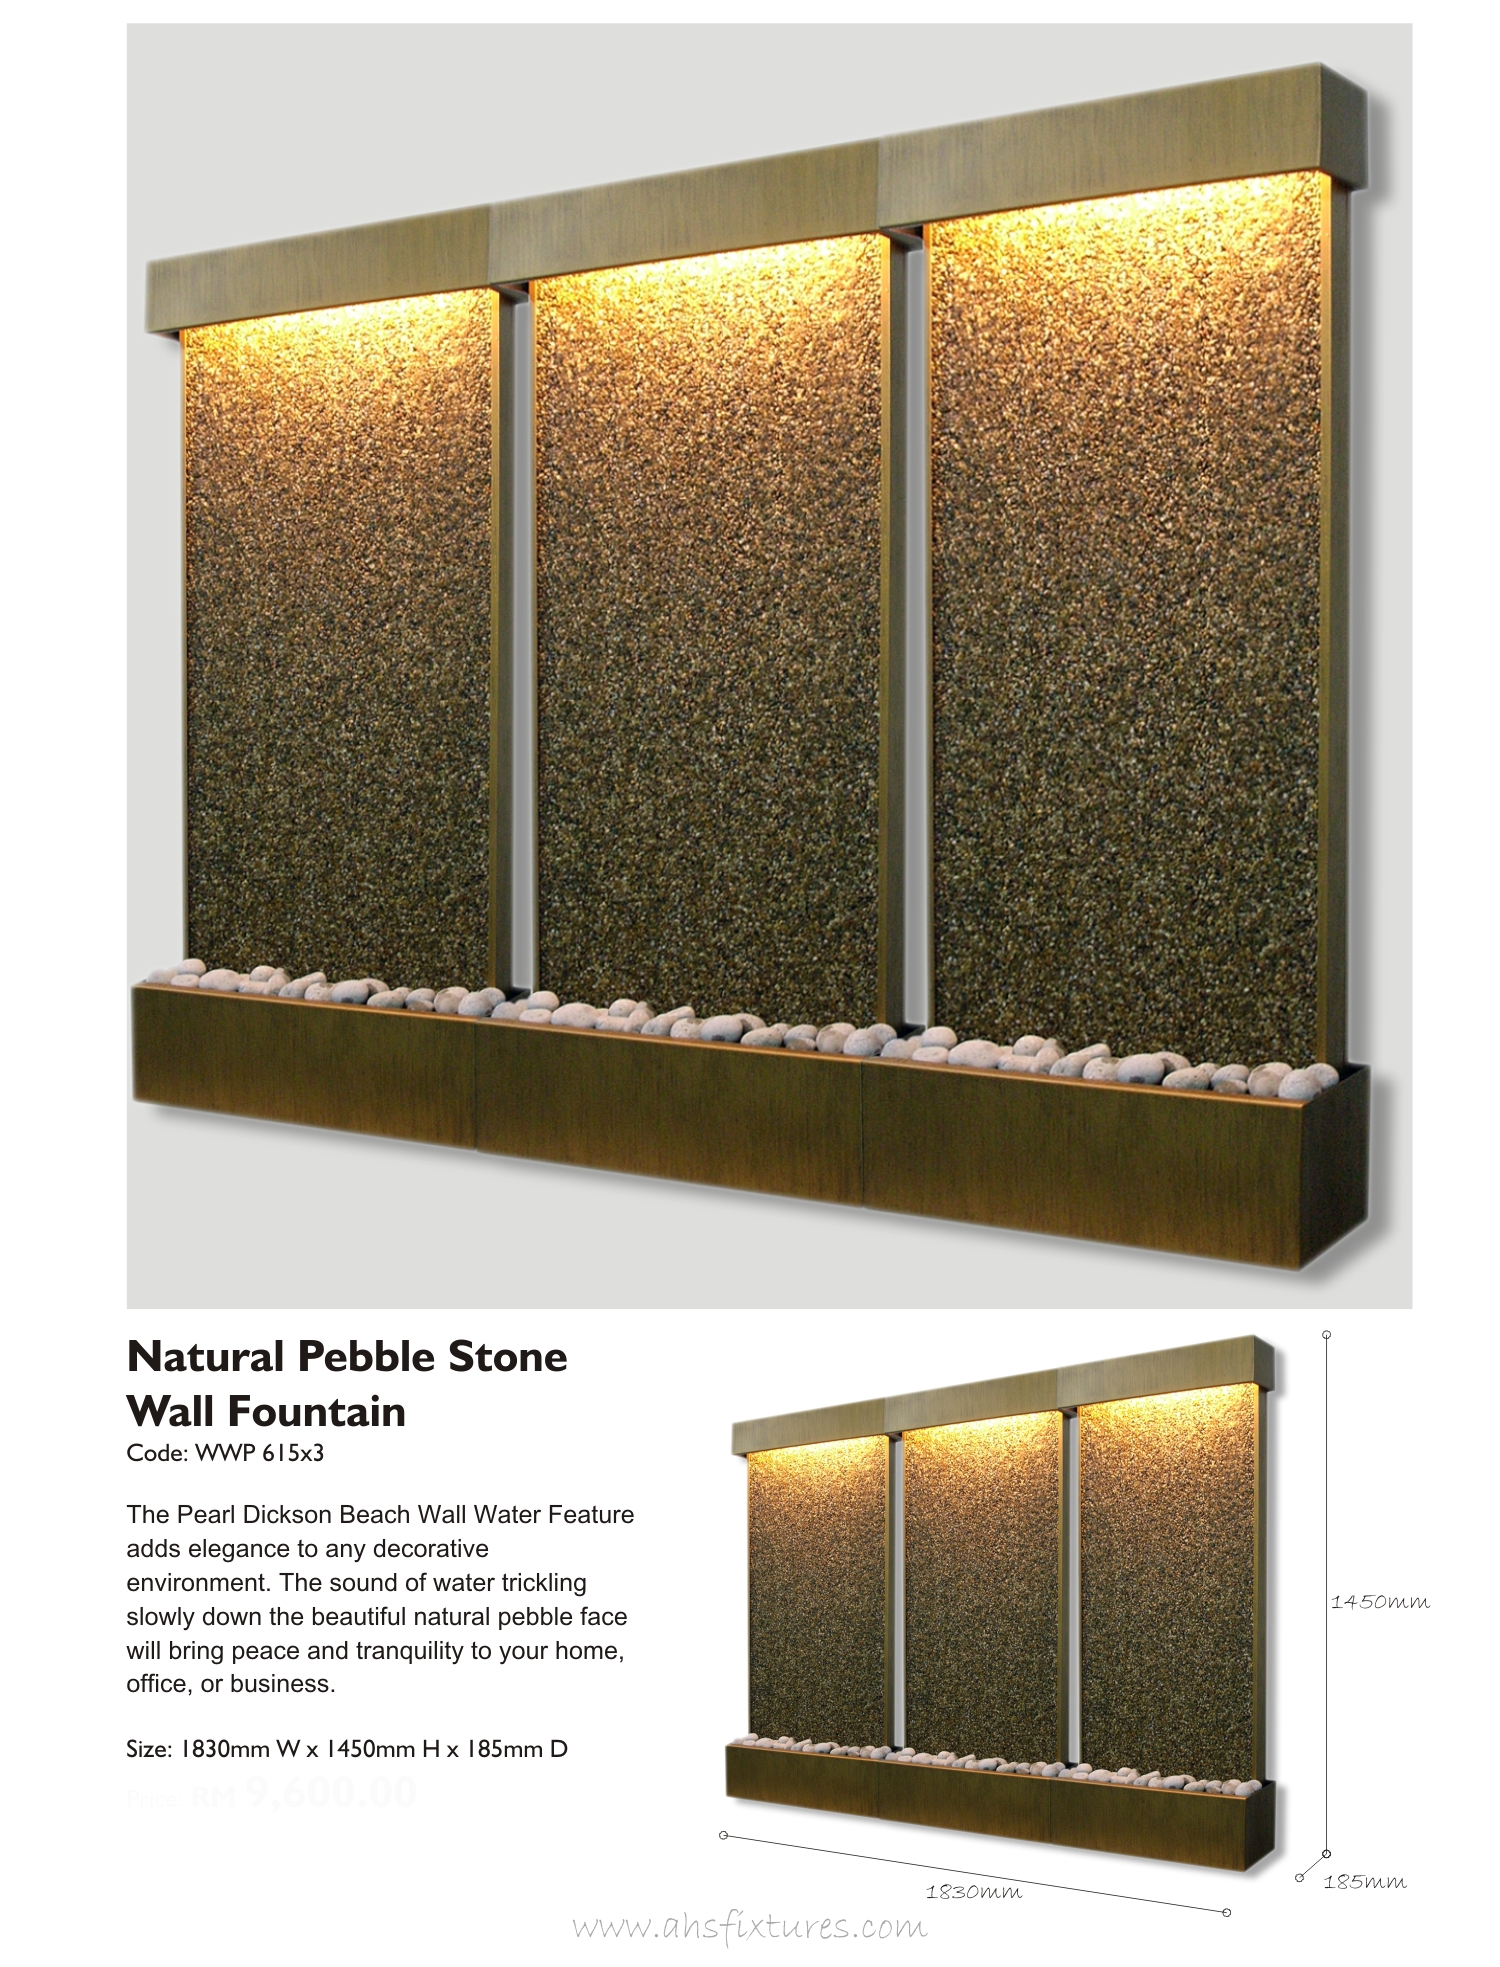 WWP-615x3 Panel Pebble Stone Wall Fountain Made In Malaysia AHS Fixtures